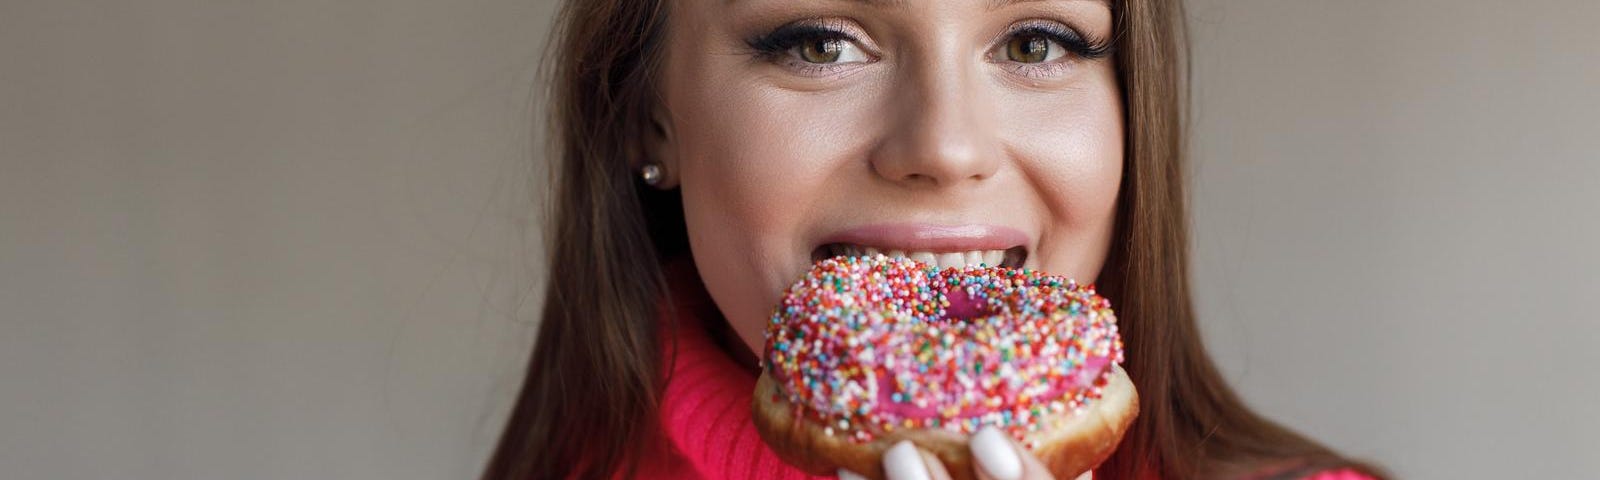 Young happy woman with donut smiling.